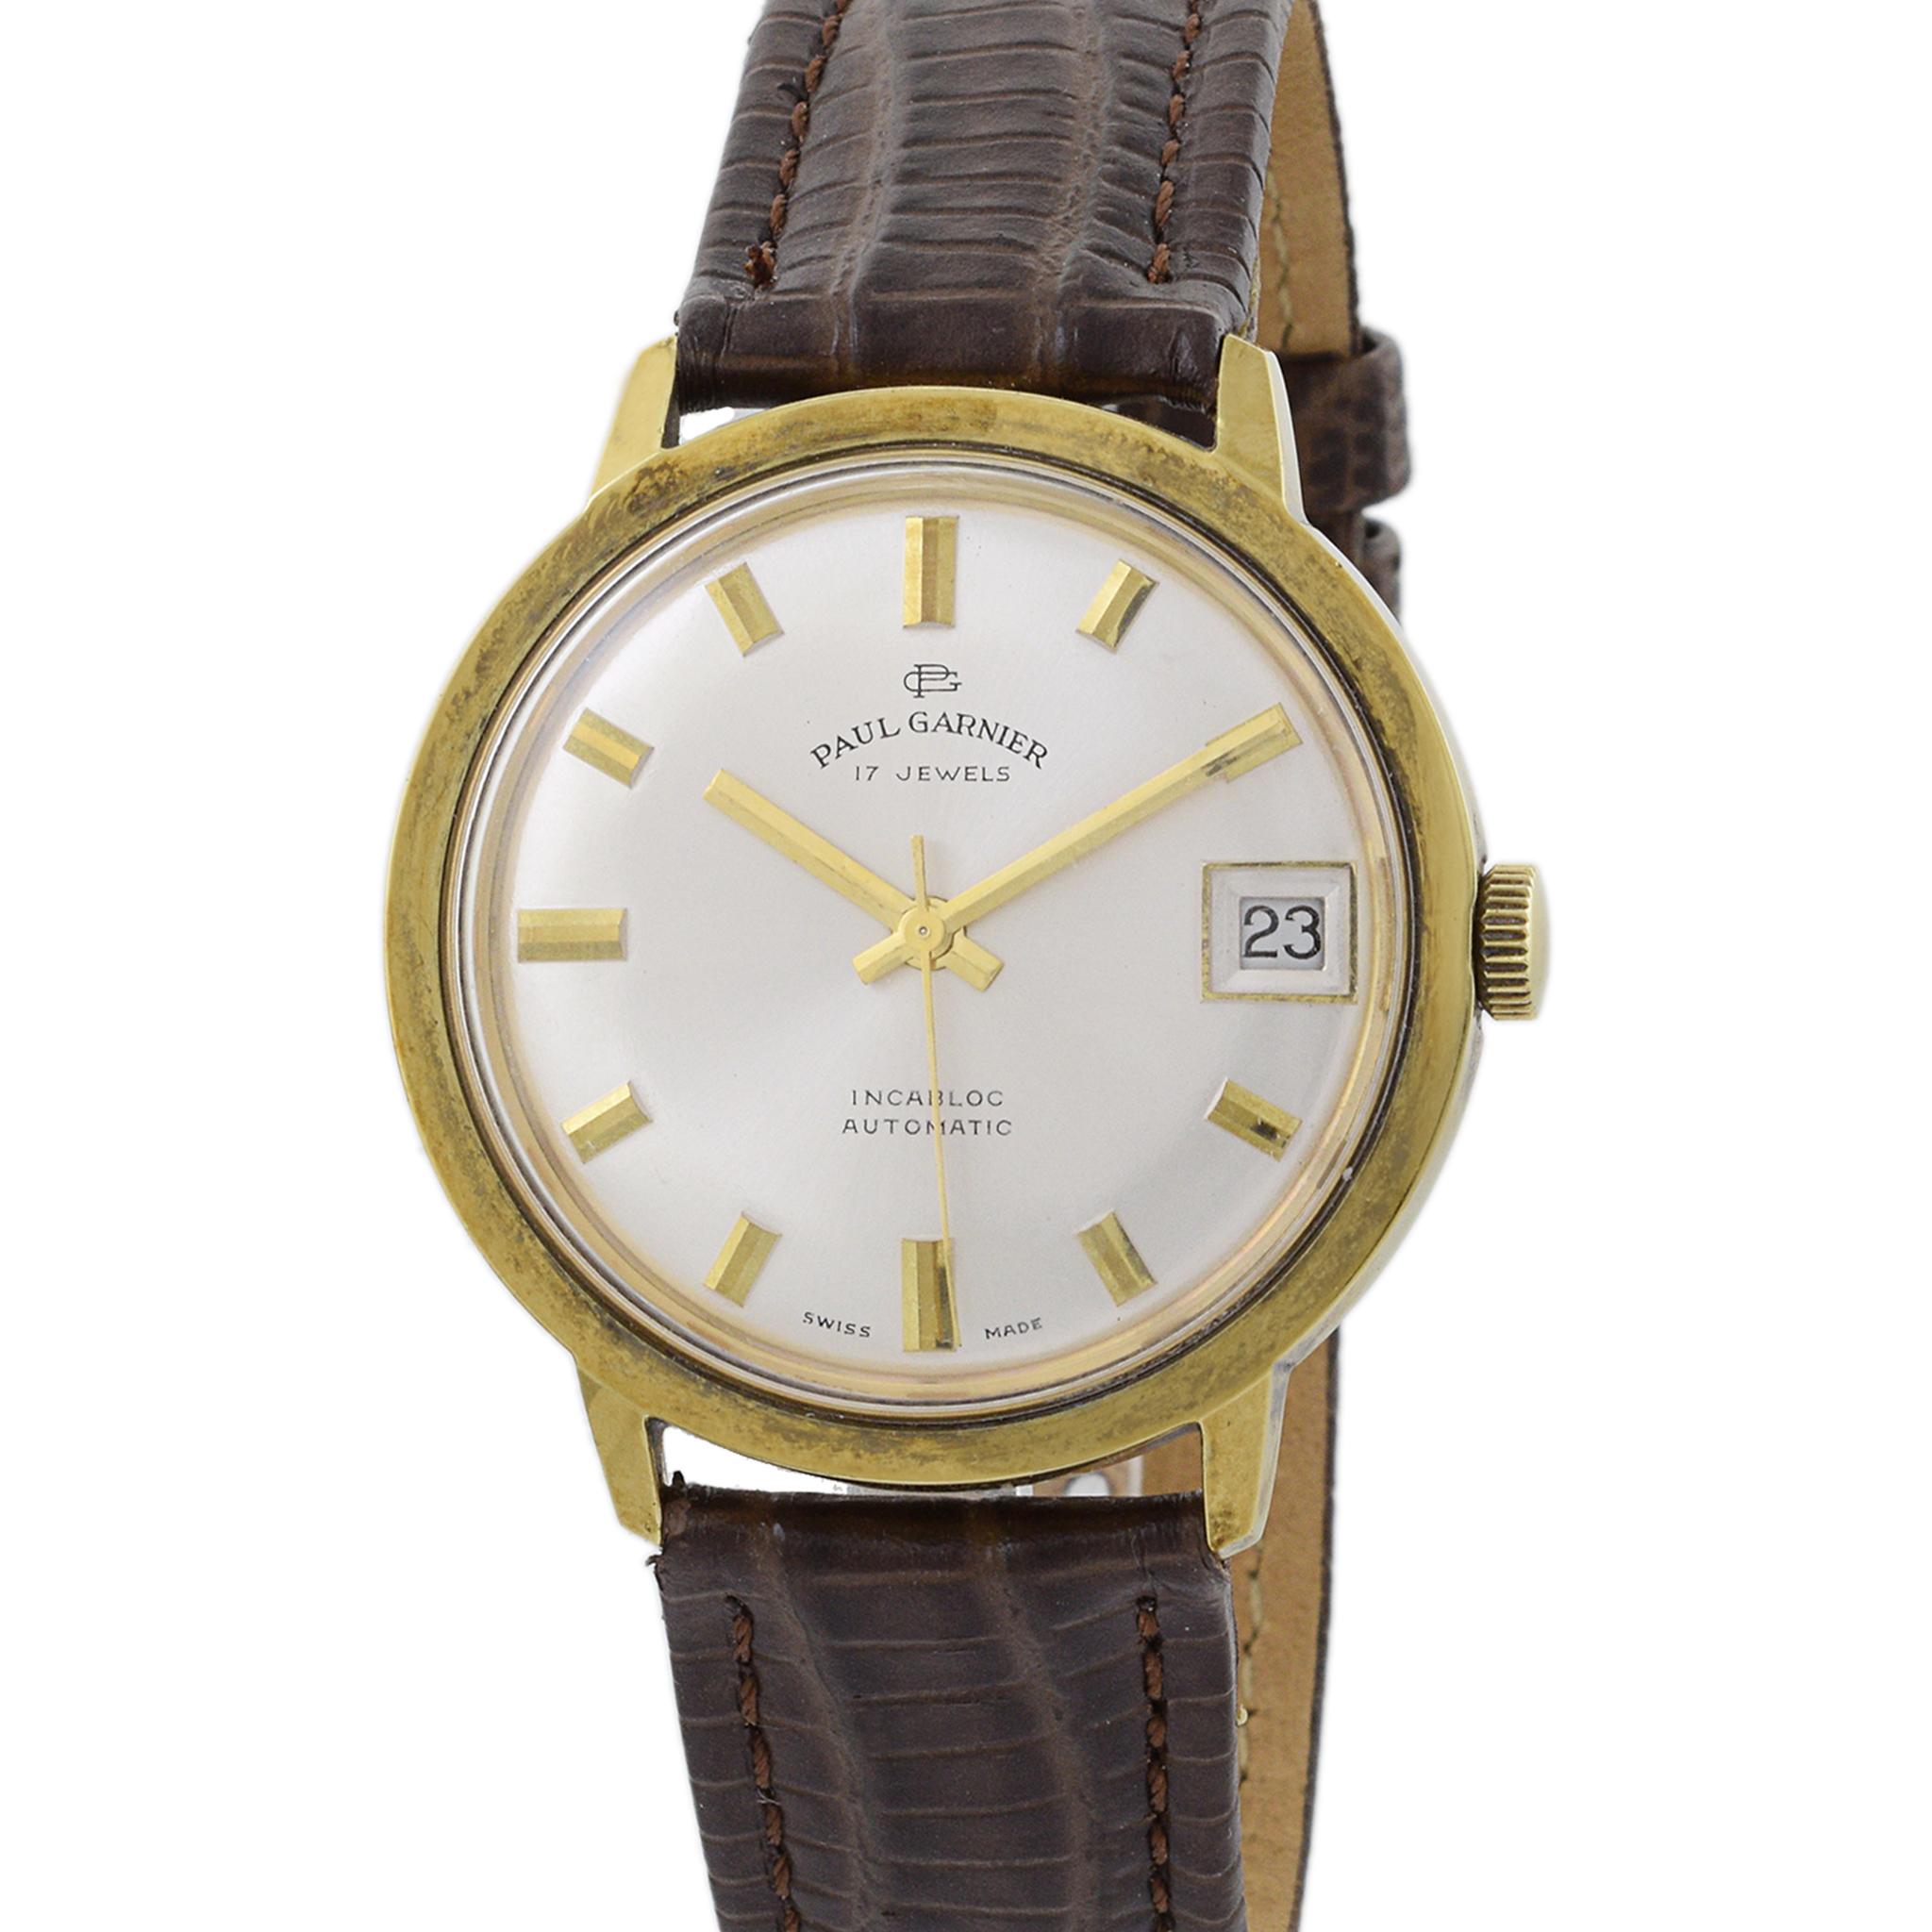 Paul Garnier Calatrava Date Automatic Rolled Gold Plate In Good Condition For Sale In New York, NY